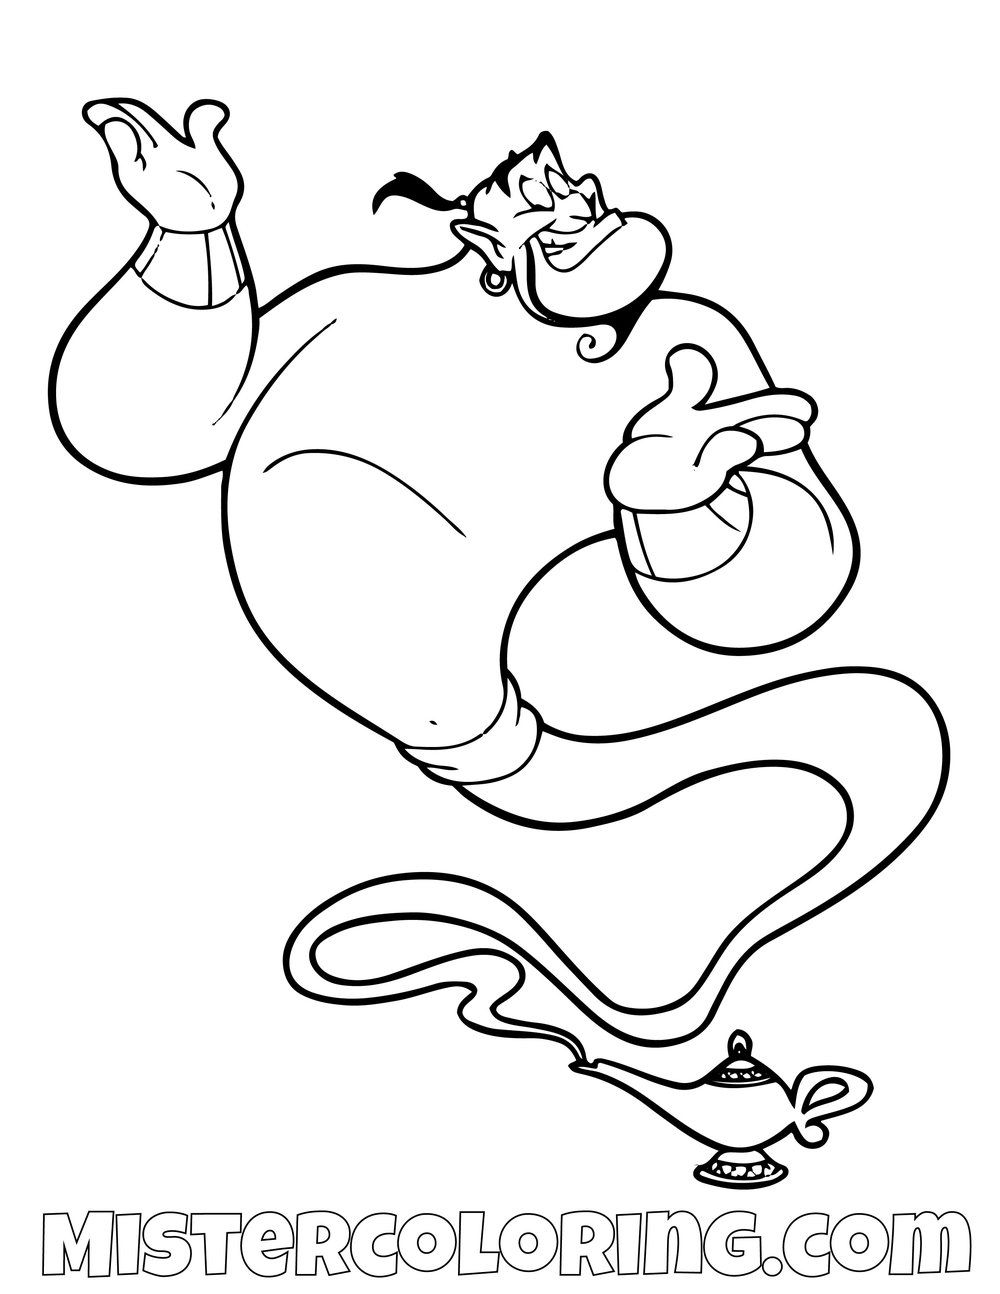 Genie Escaping Lamp Aladdin Coloring Page For Kids in 2020 ...